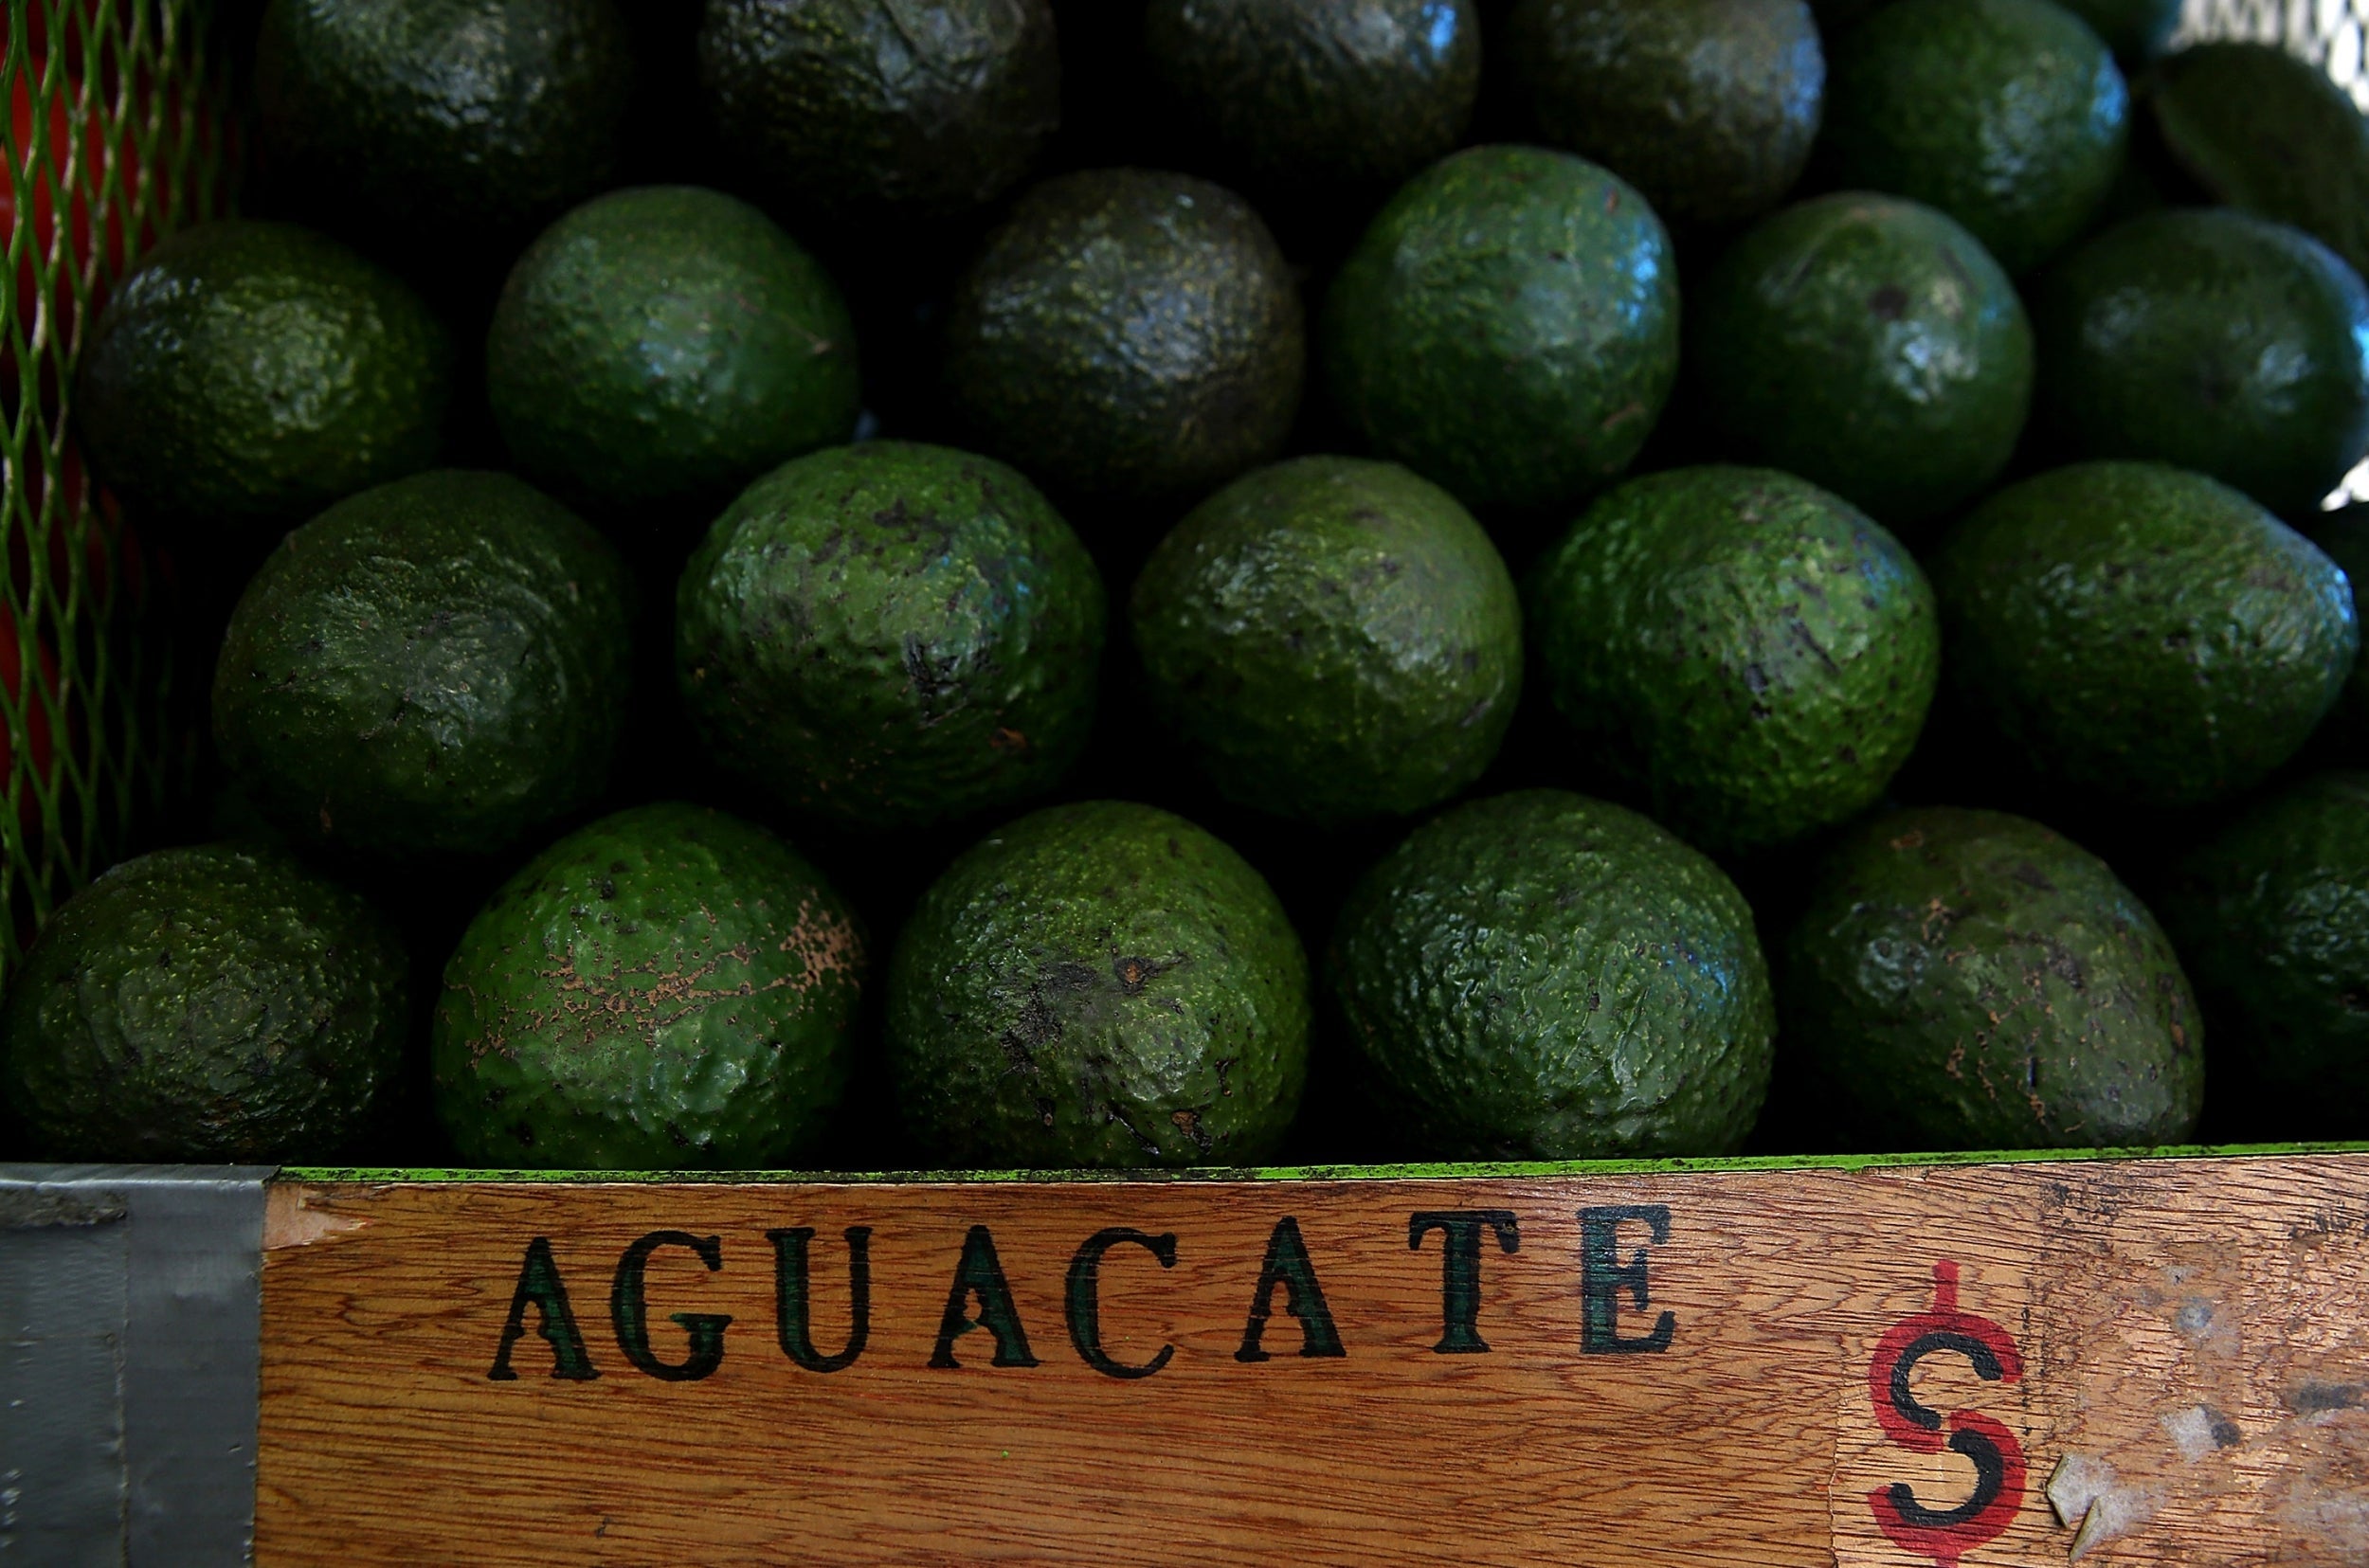 Mexico is one of the world’s largest producers of avocados – and it’s feeling the stress